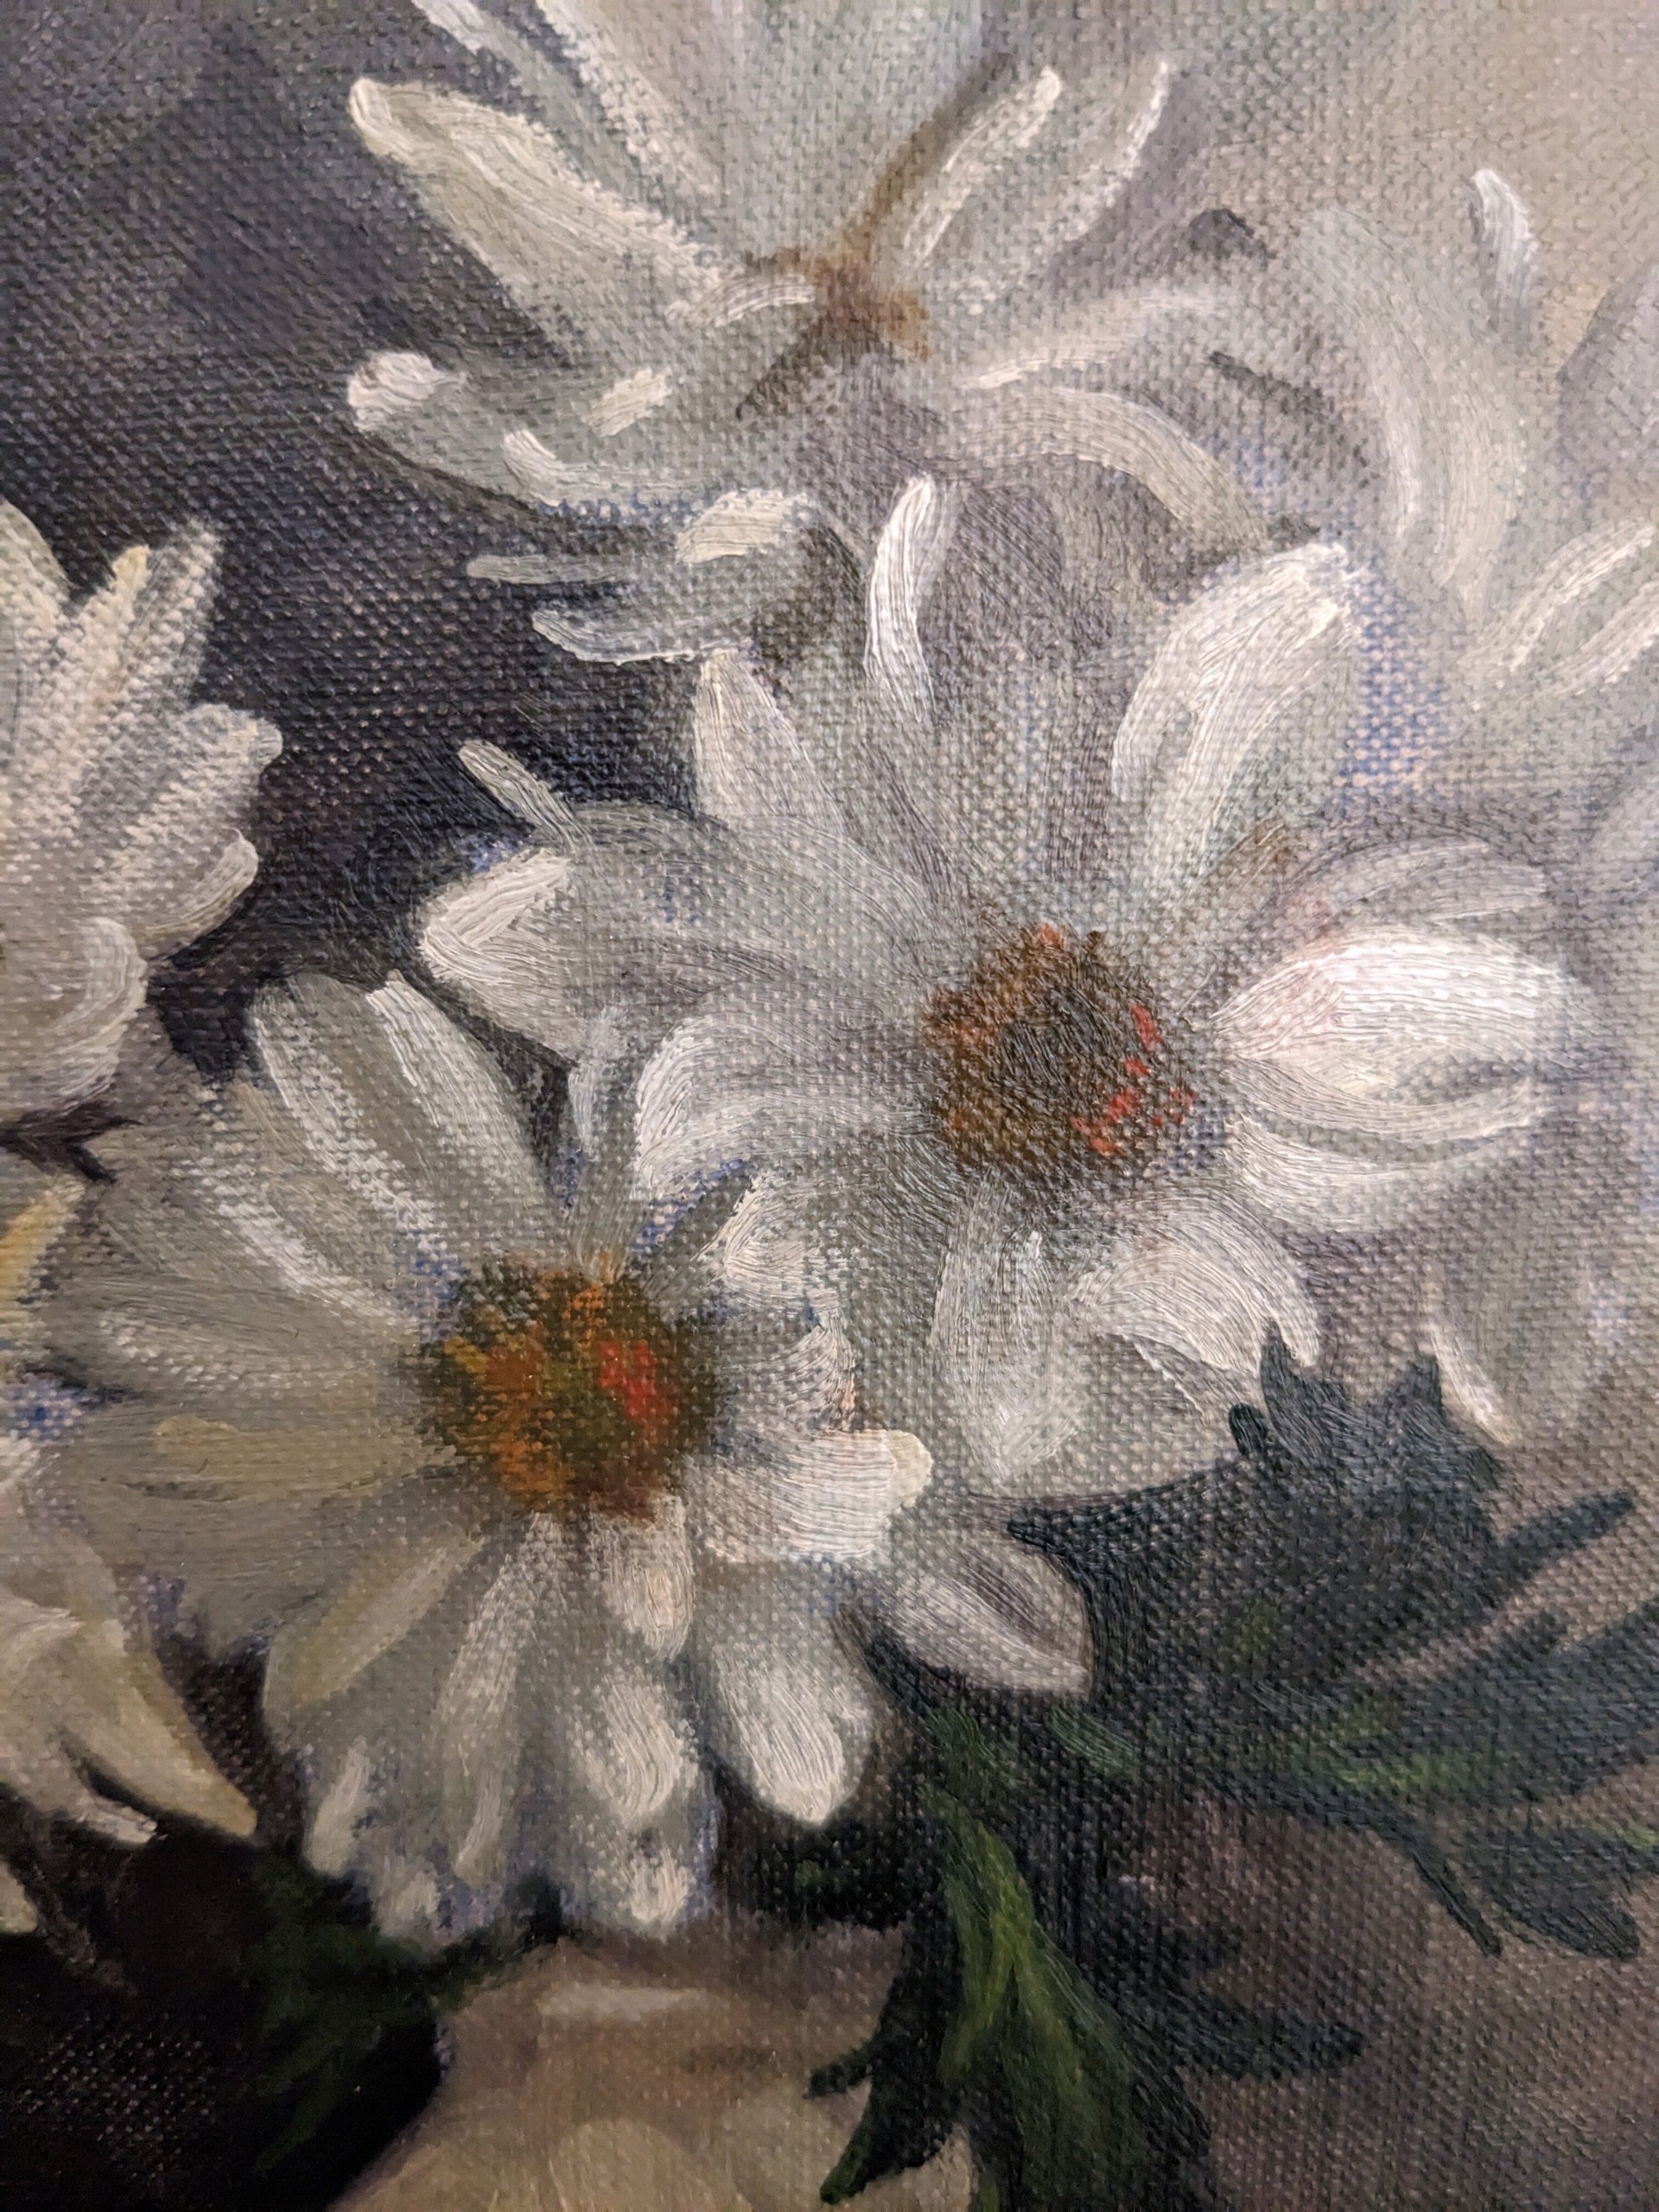 White Daisies by Christopher Pierce